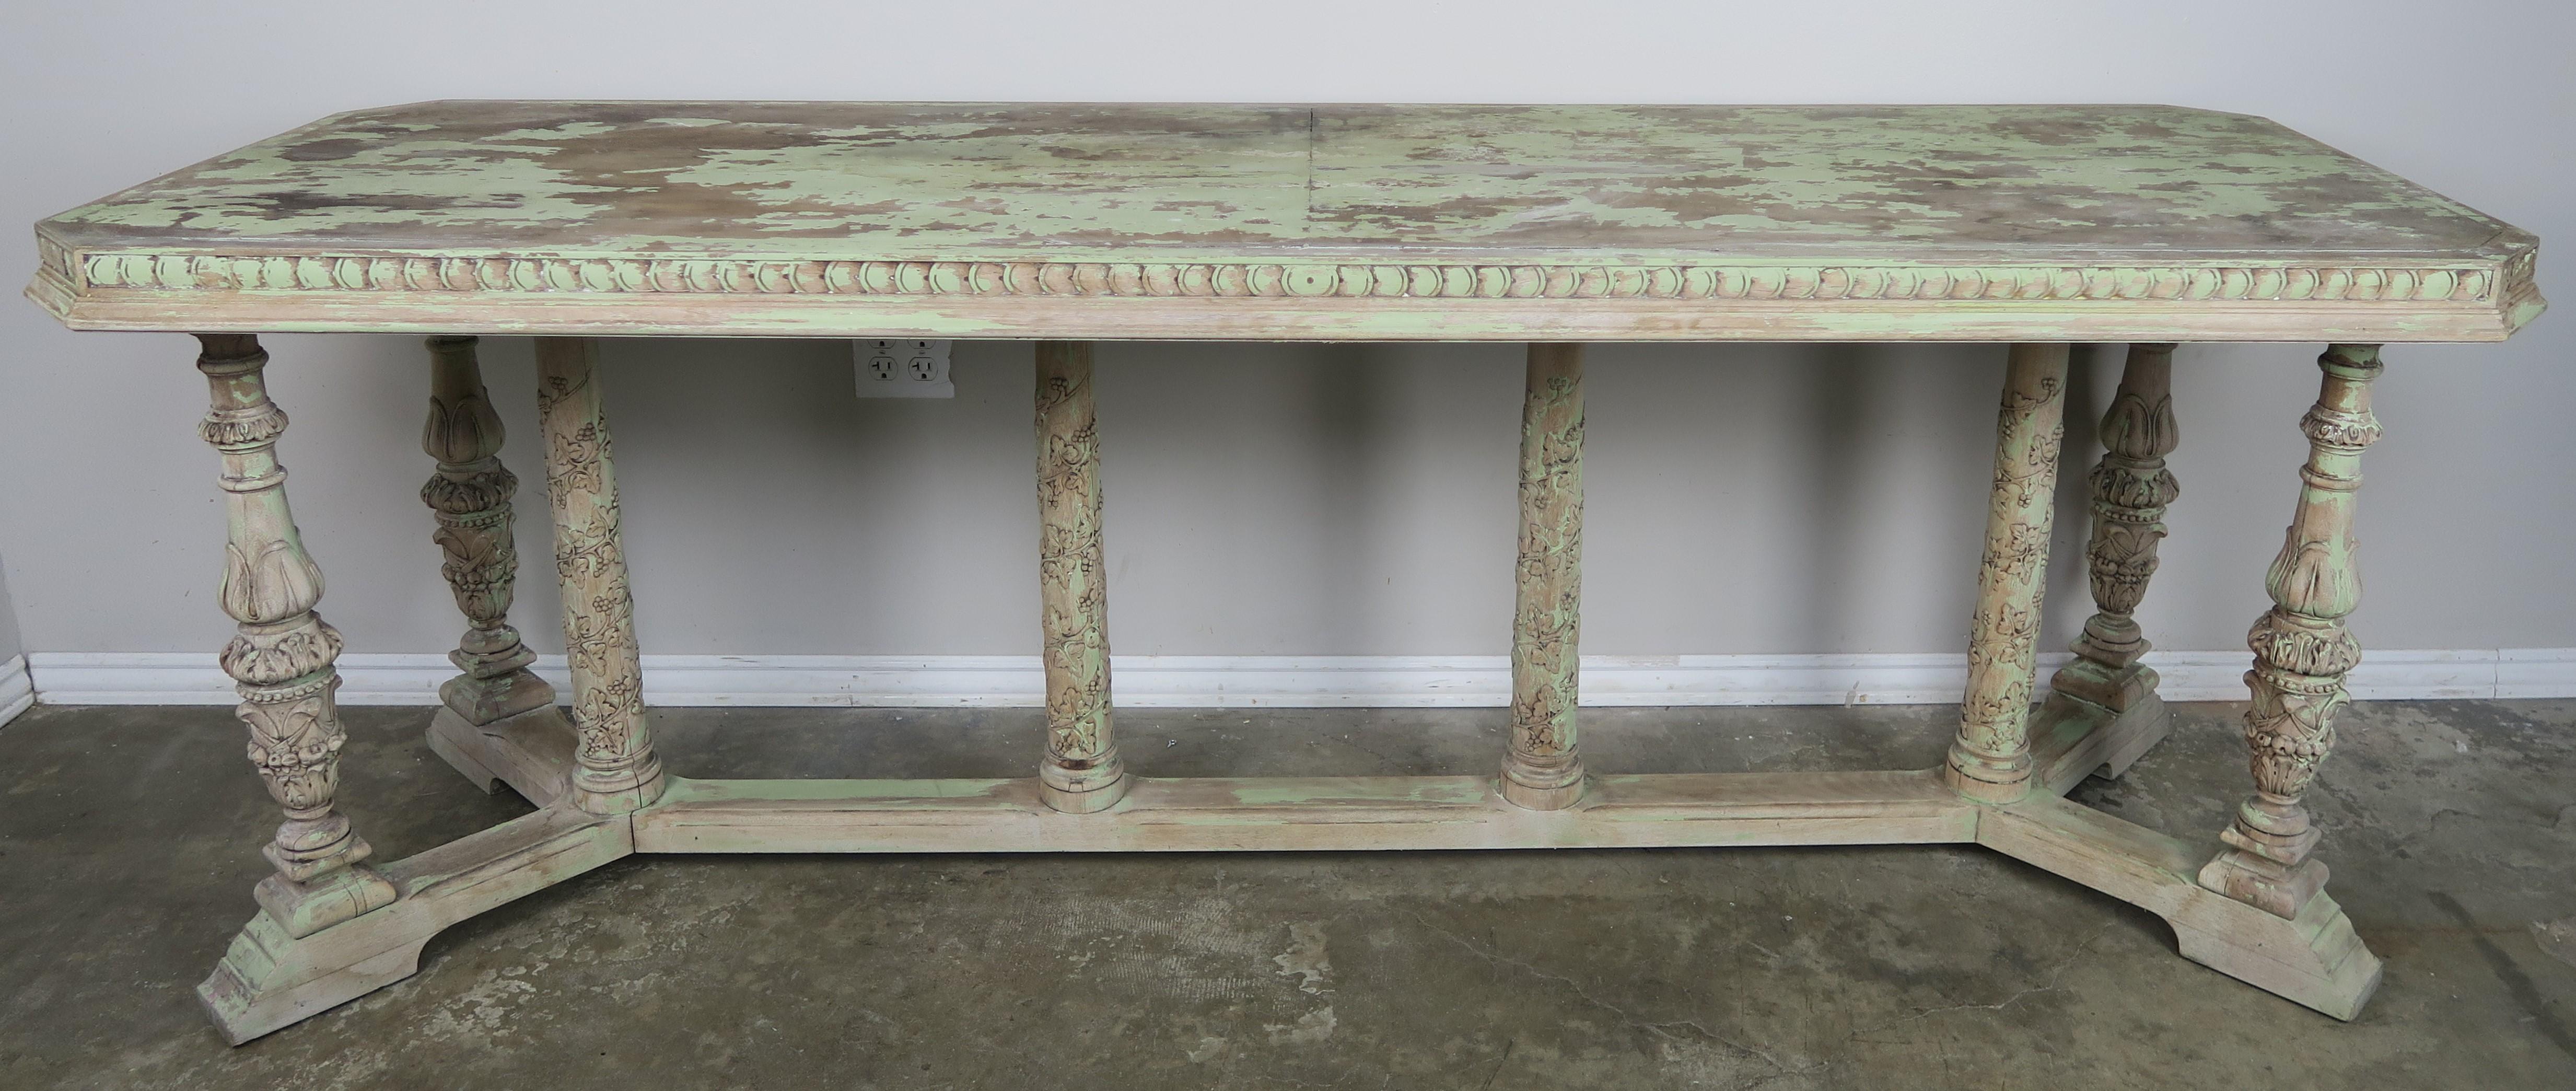 Italian painted Neoclassical style carved console standing on four legs that are connected by a center stretcher with four columns adorned with flower decoration.  The console is painted in a celadon green coloration that is beautifully worn and